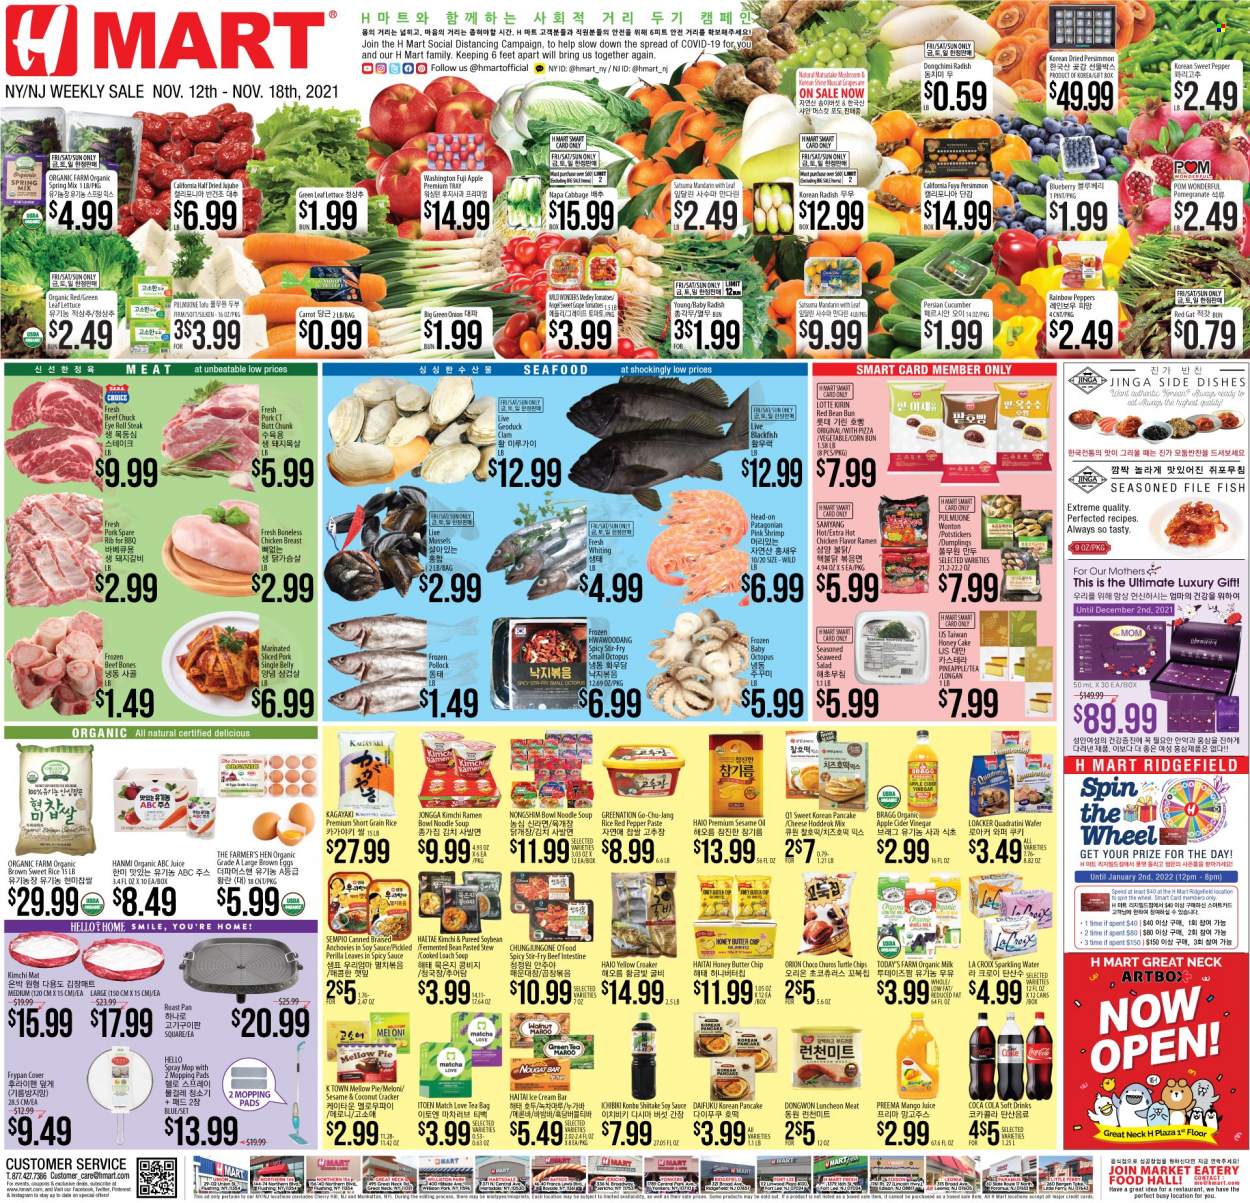 thumbnail - Hmart Flyer - 11/12/2021 - 11/18/2021 - Sales products - persimmons, jujube, cake, pie, cabbage, corn, radishes, lettuce, salad, peppers, green onion, mandarines, pineapple, Fuji apple, clams, mussels, pollock, octopus, seafood, fish, shrimps, whiting, ramen, pizza, soup, sauce, pancakes, dumplings, noodles cup, noodles, lunch meat, tofu, organic milk, eggs, butter, ice cream, wafers, nougat, crackers, anchovies, rice, short grain rice, soy sauce, apple cider vinegar, sesame oil, oil, honey, Coca-Cola, juice, soft drink, sparkling water, green tea, matcha, tea bags, chicken breasts, steak, deodorant, mop, mug, tray, pan, frying pan, pomegranate. Page 1.